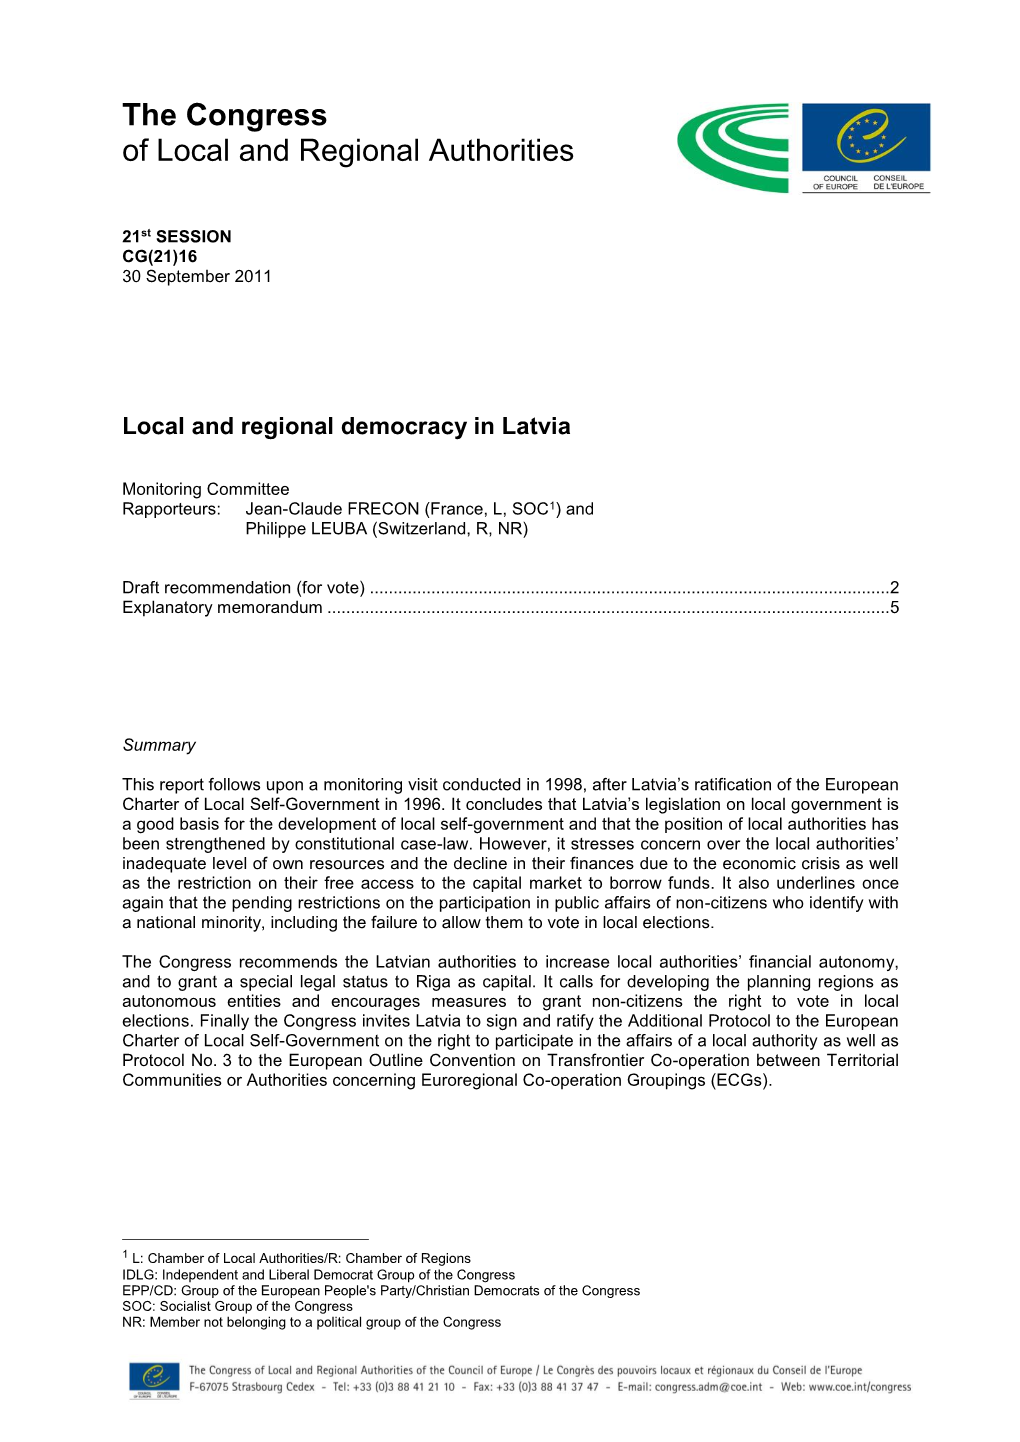 Local and Regional Democracy in Latvia